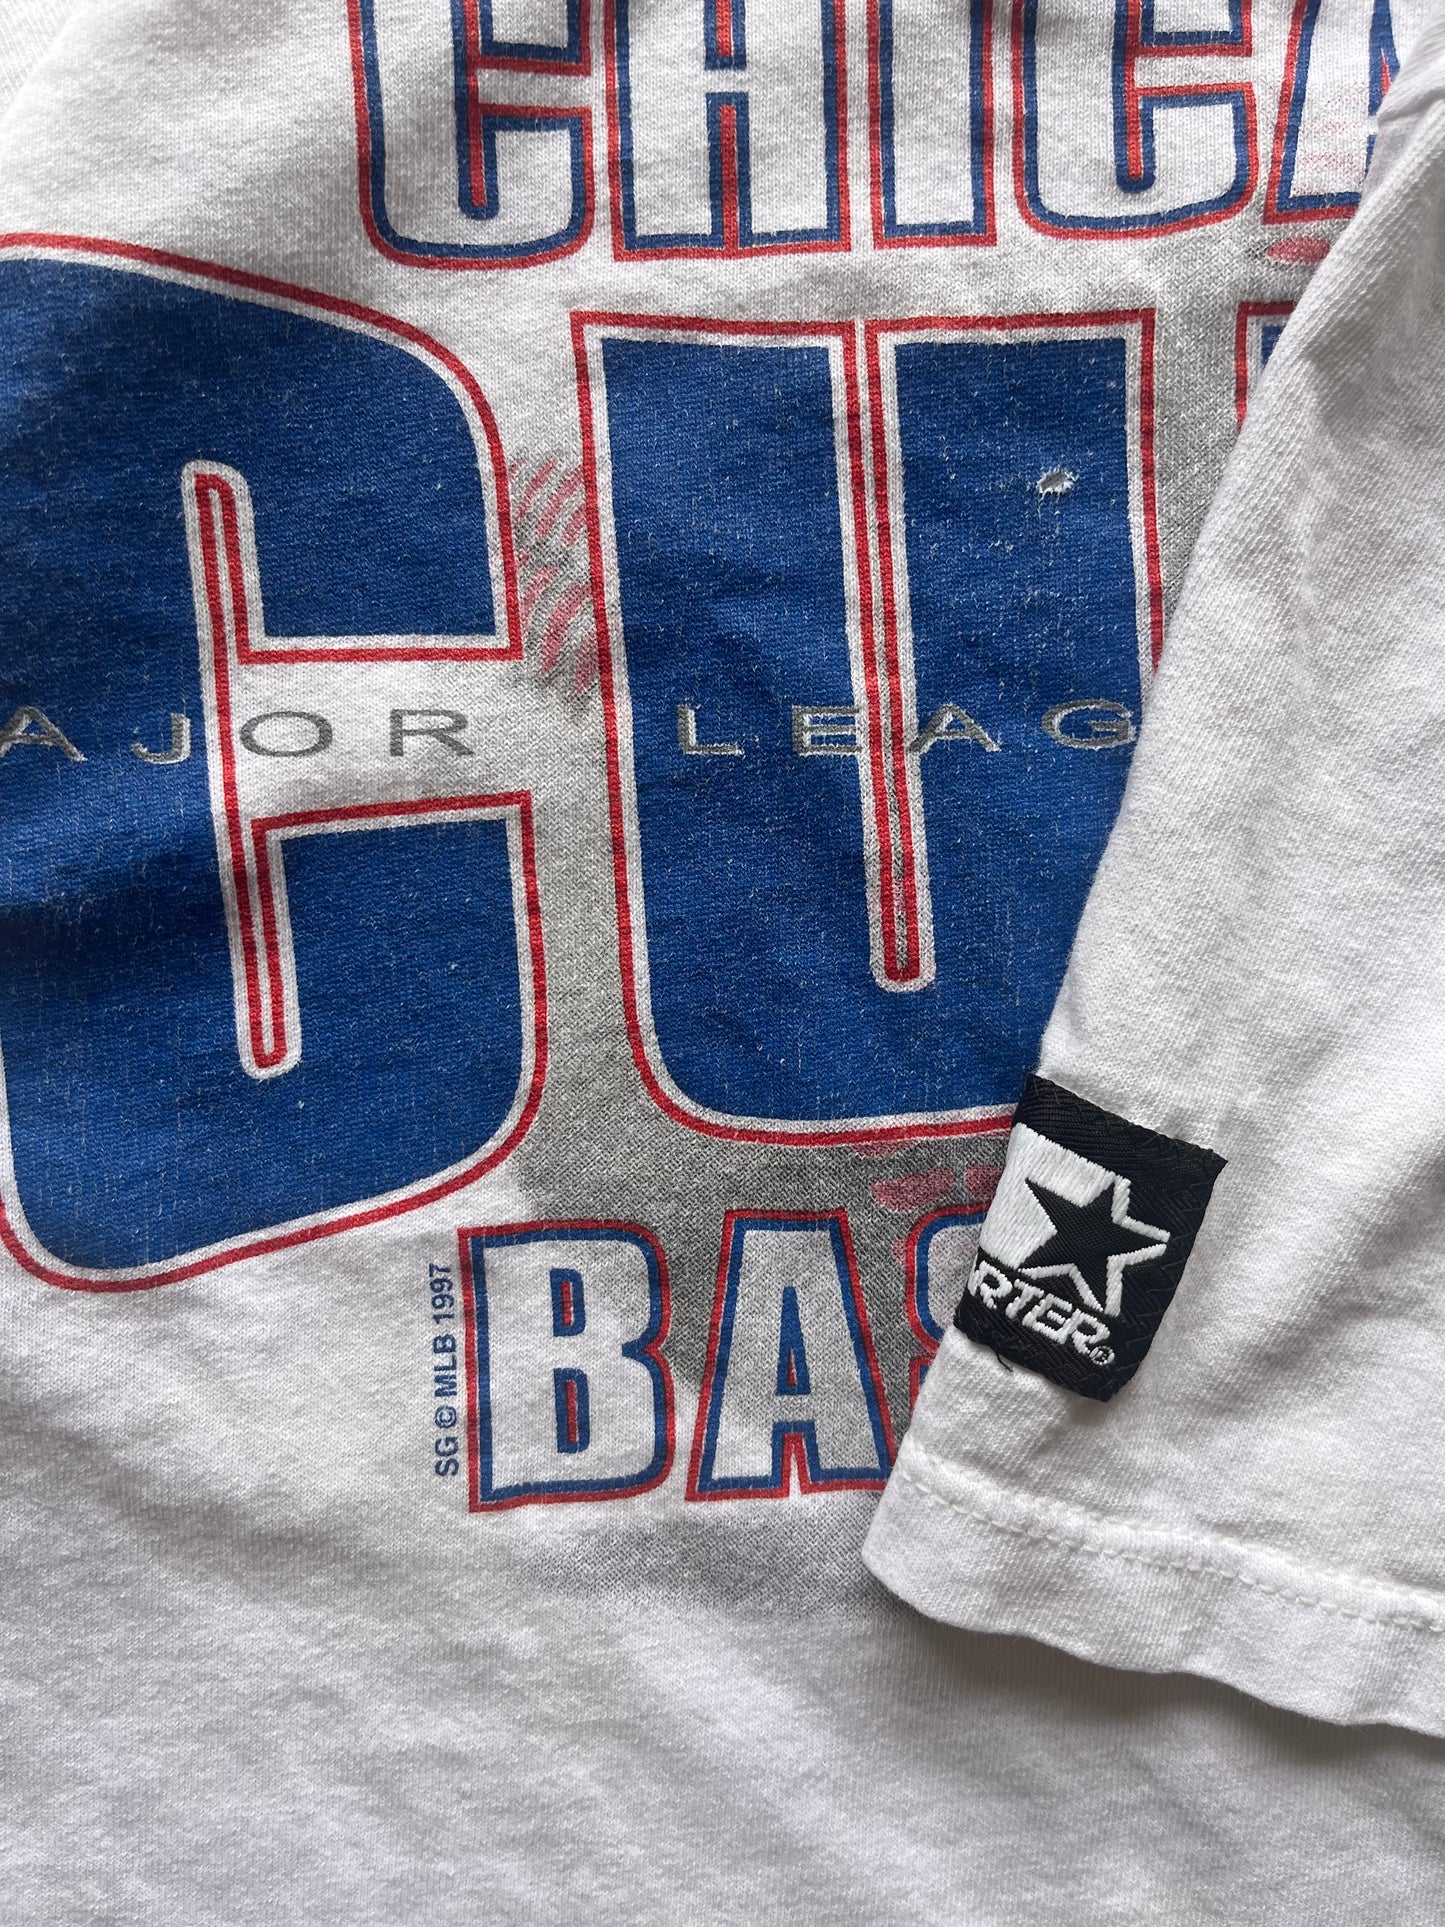 (L) 1997 Chicago Cubs Tee